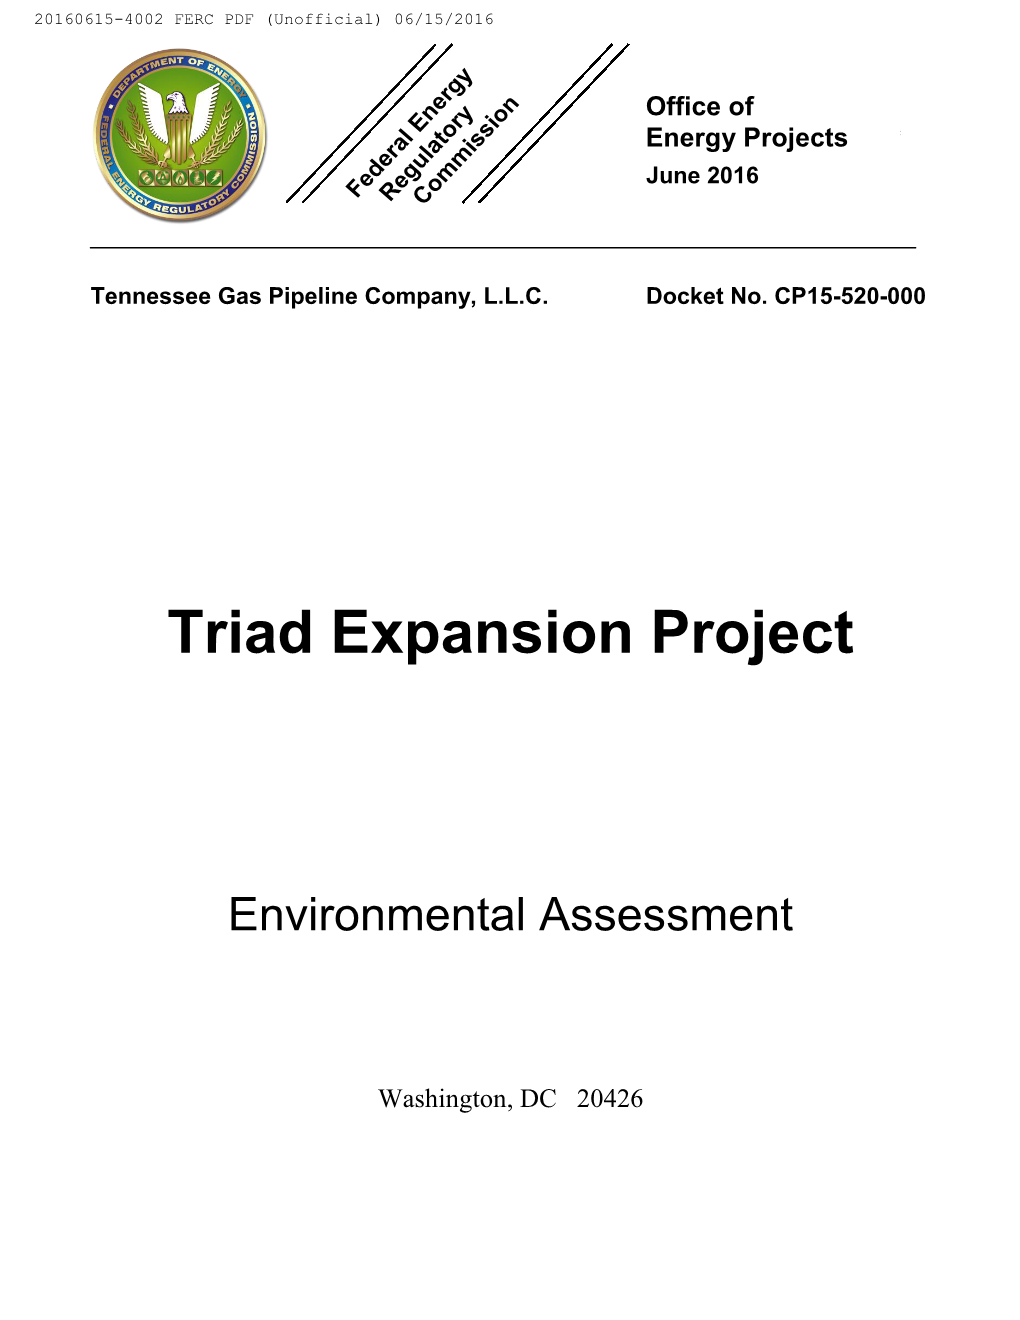 Triad Expansion Project